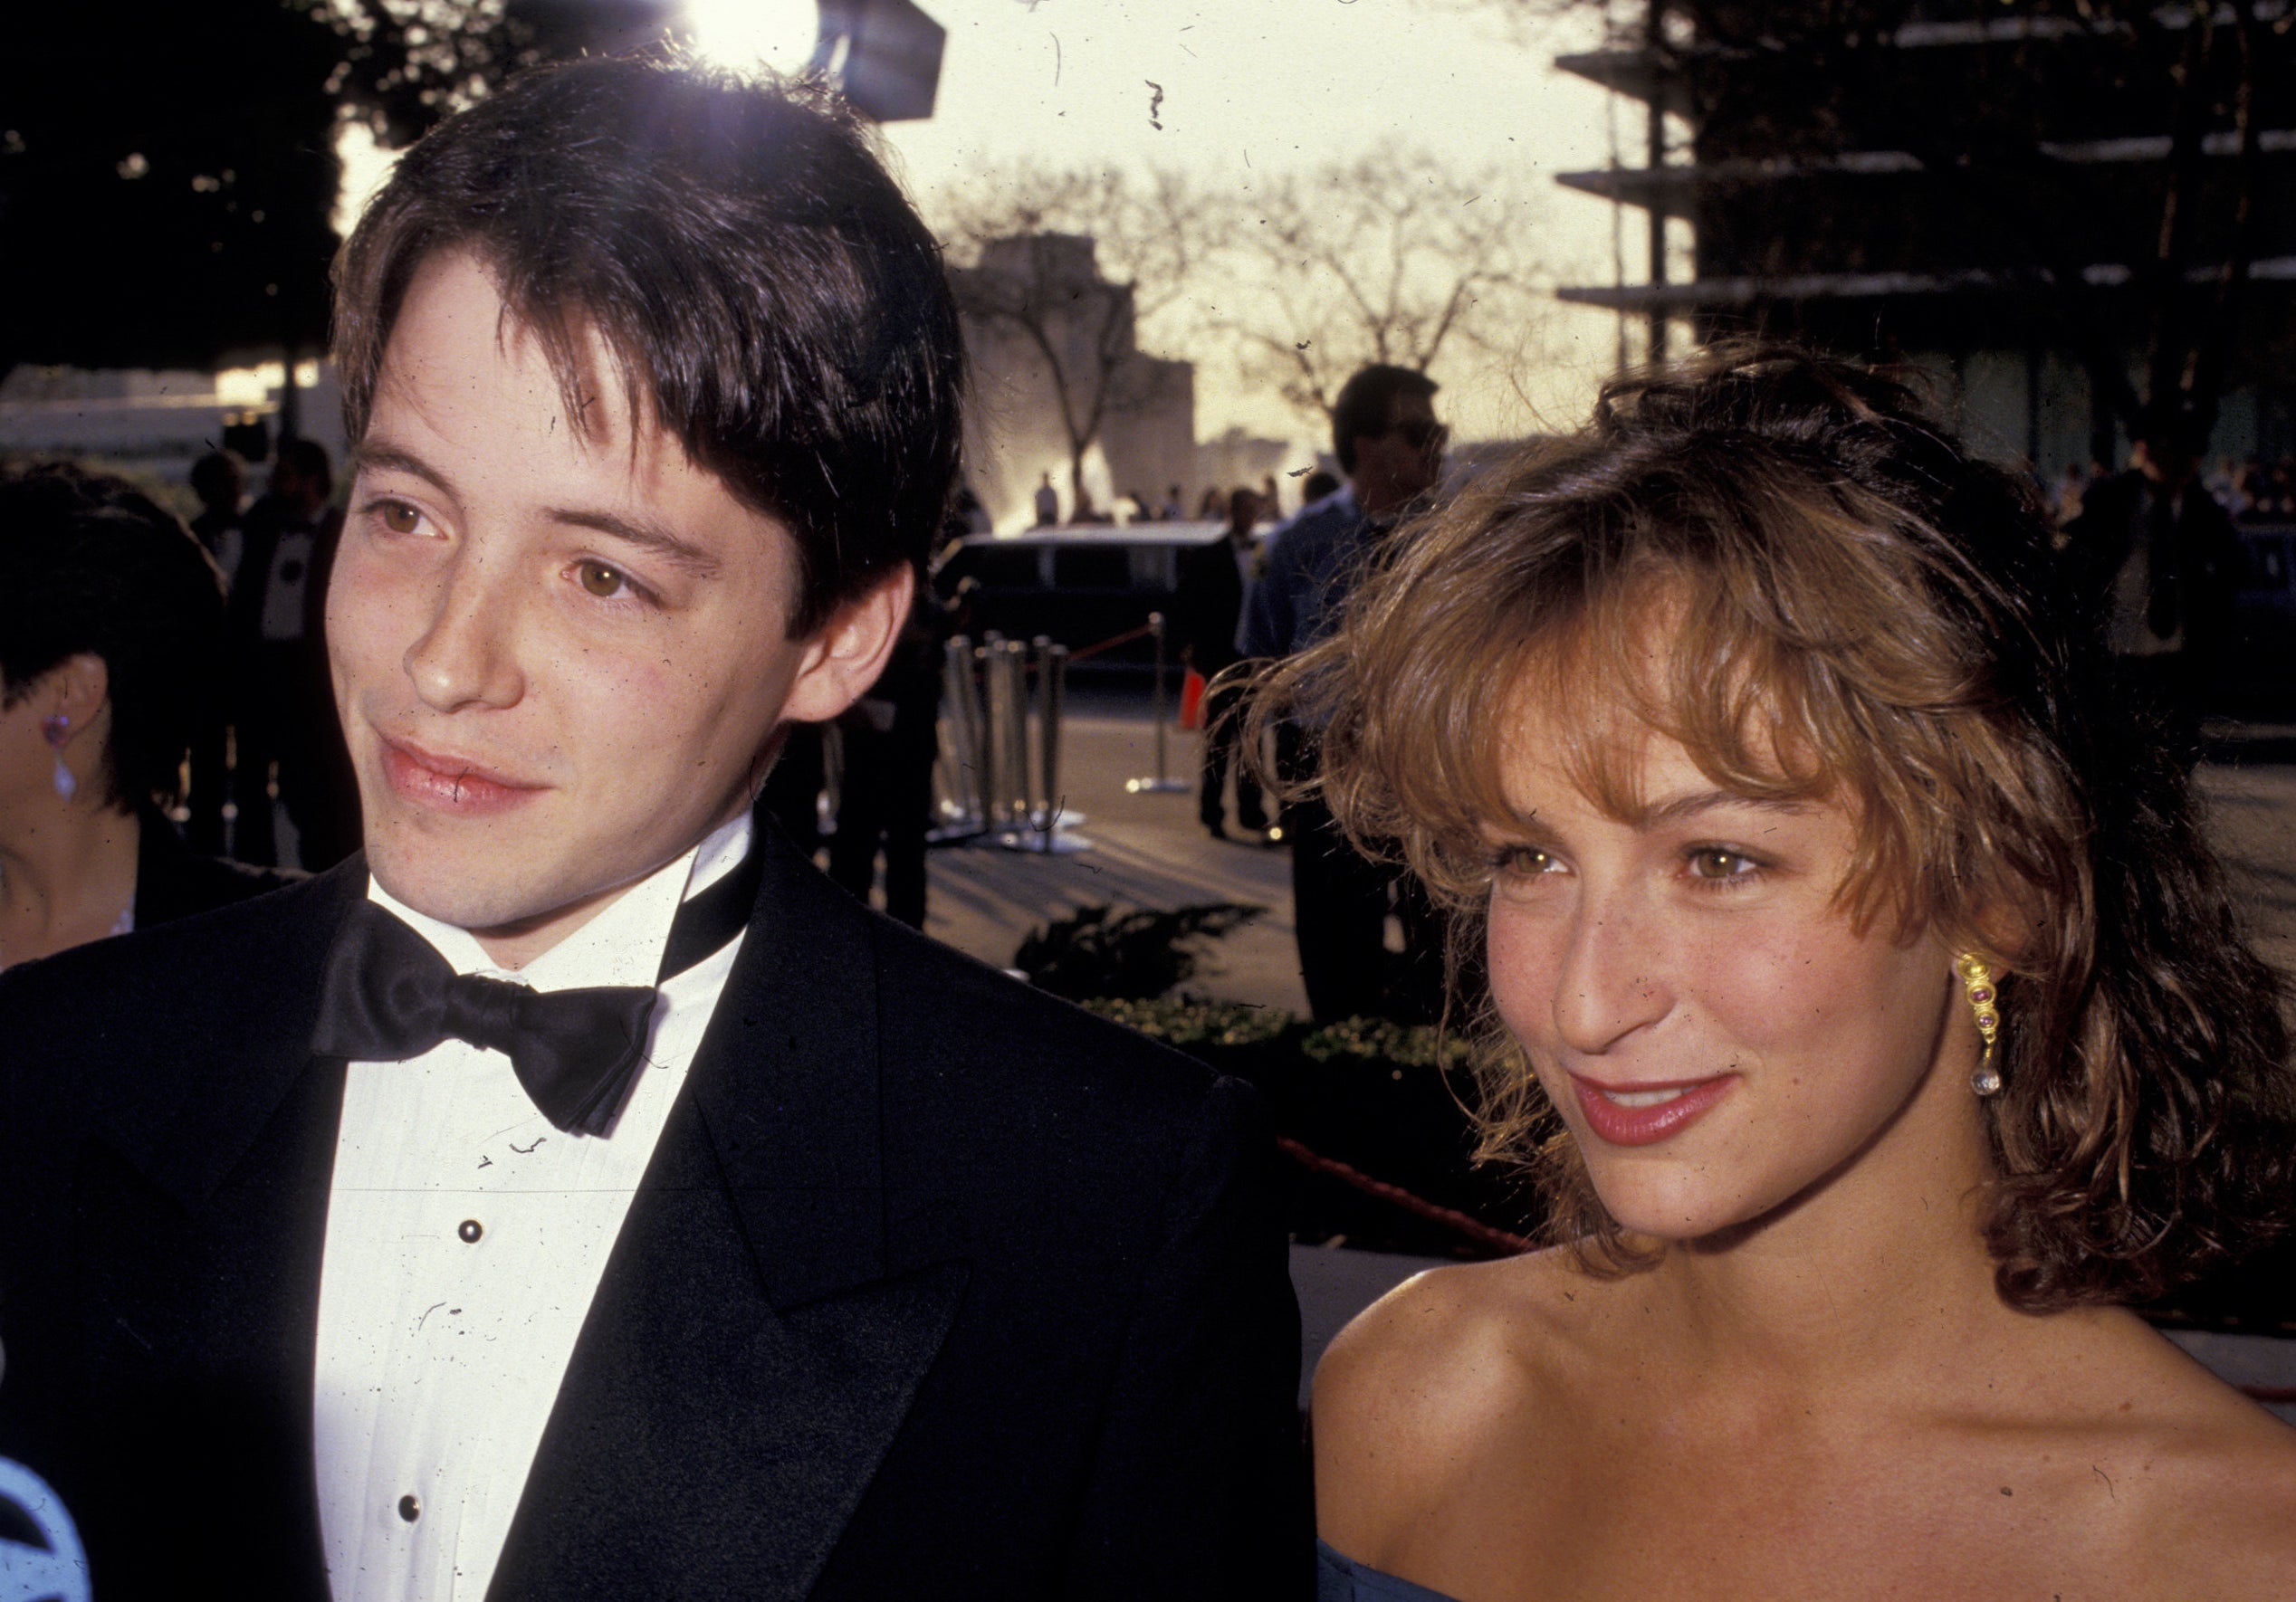 Matthew Broderick and Jennifer Grey on the red carpet